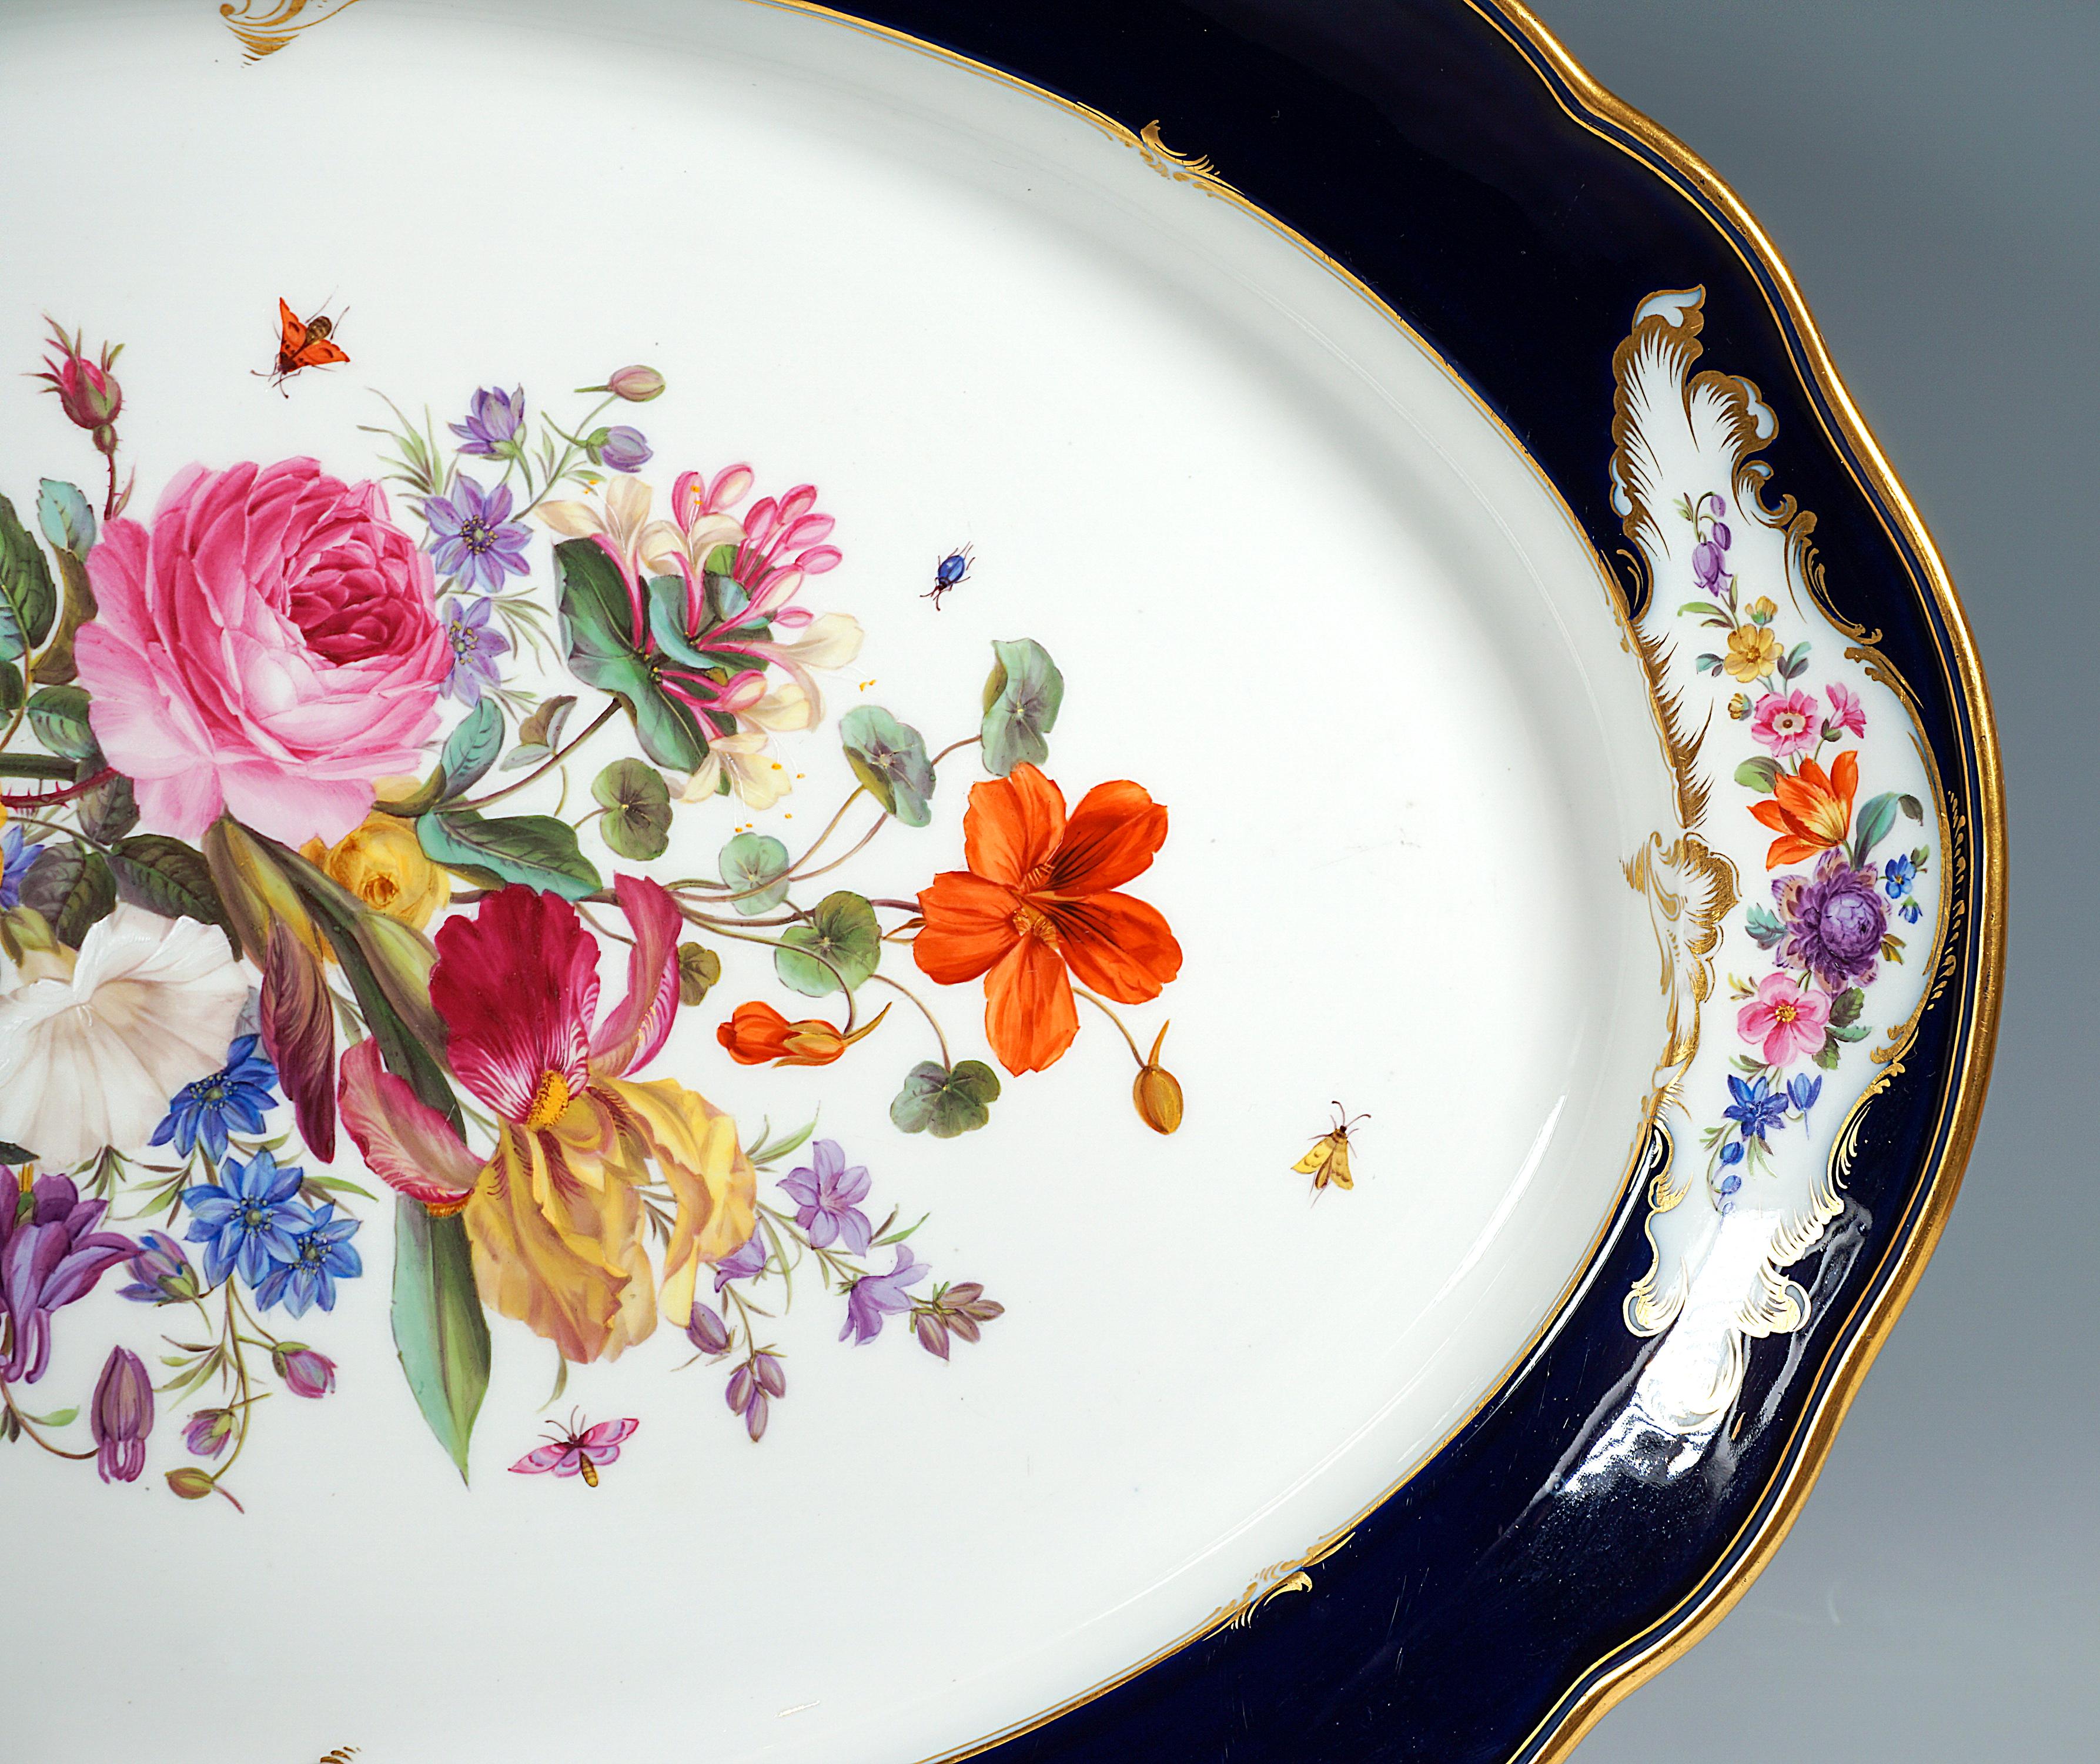 Hand-Crafted Stately Exceptionally Large Meissen Ceremonial Plate with Bouquet Painting, 1870